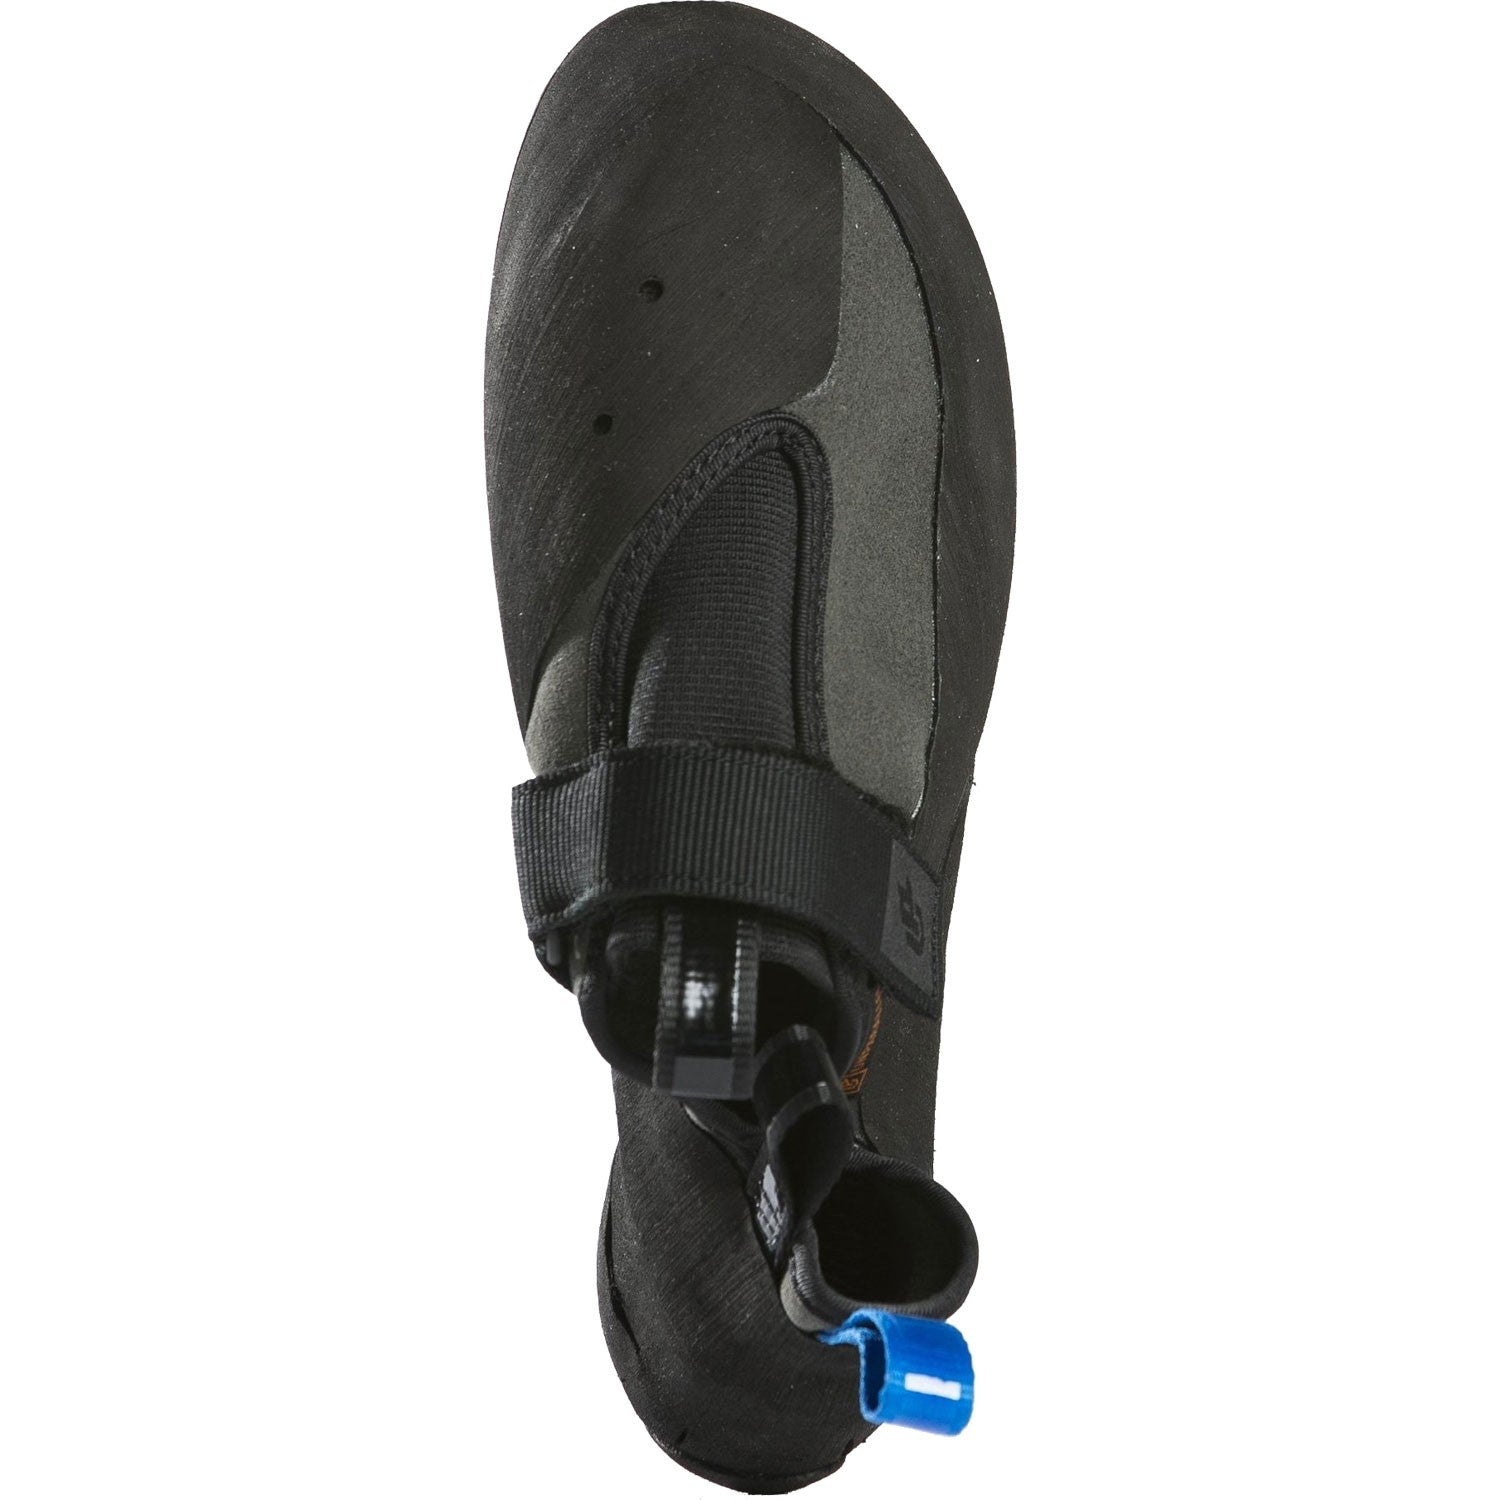 Unparallel Regulus climbing shoe, front/side view in black/grey